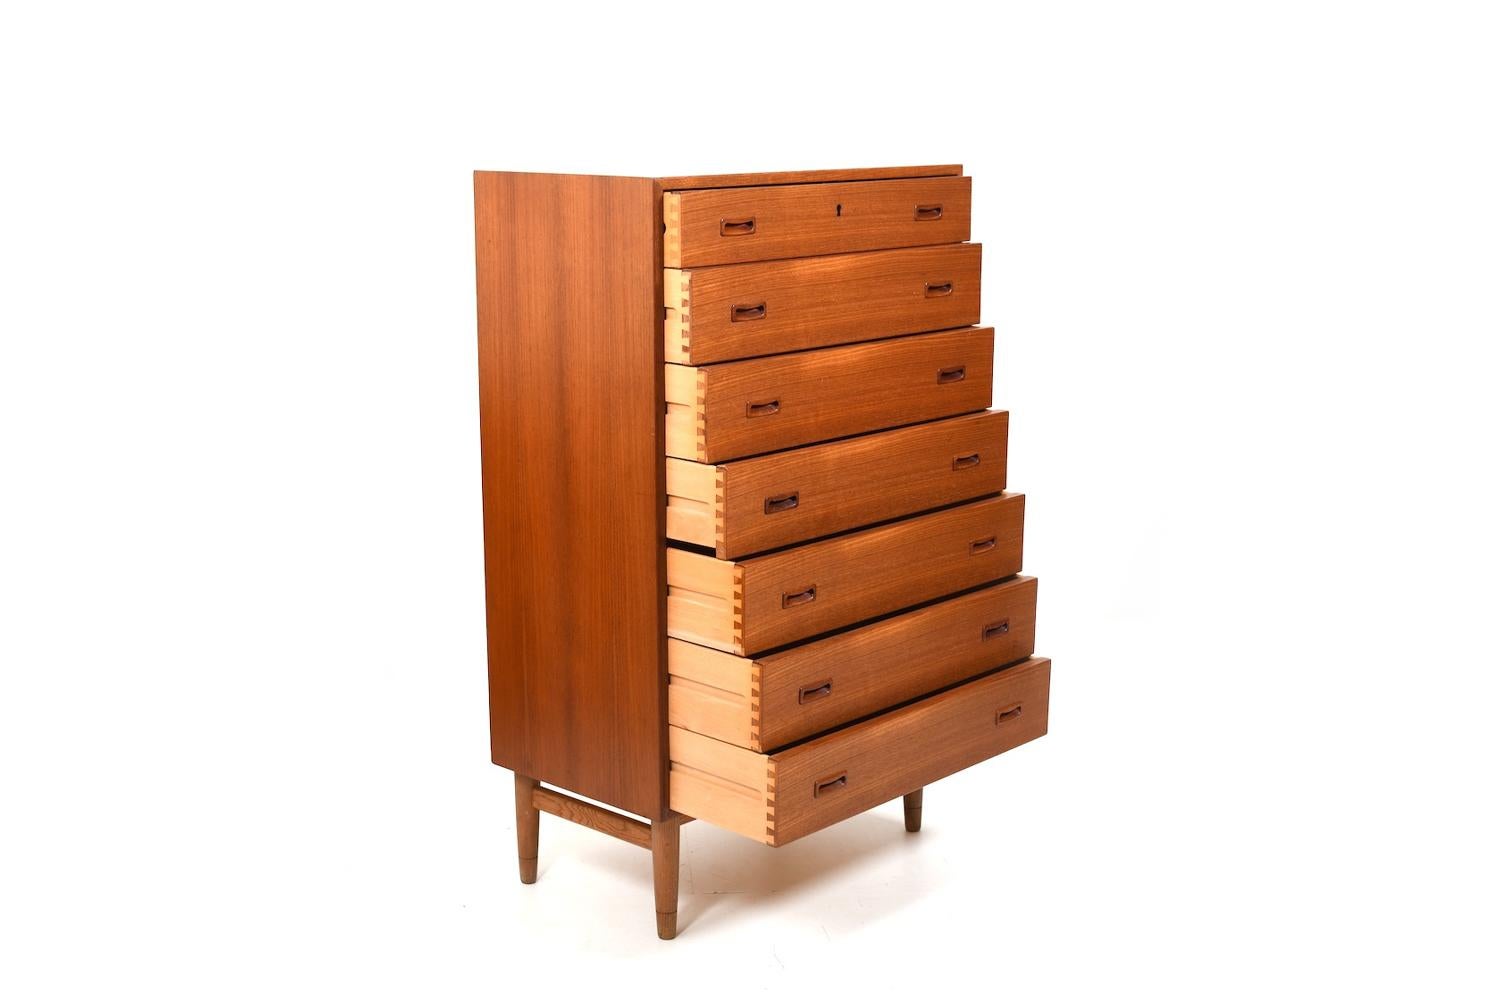 20th Century Tallboy Chest of Drawers in Teak by Omann Jun. 1960s. For Sale